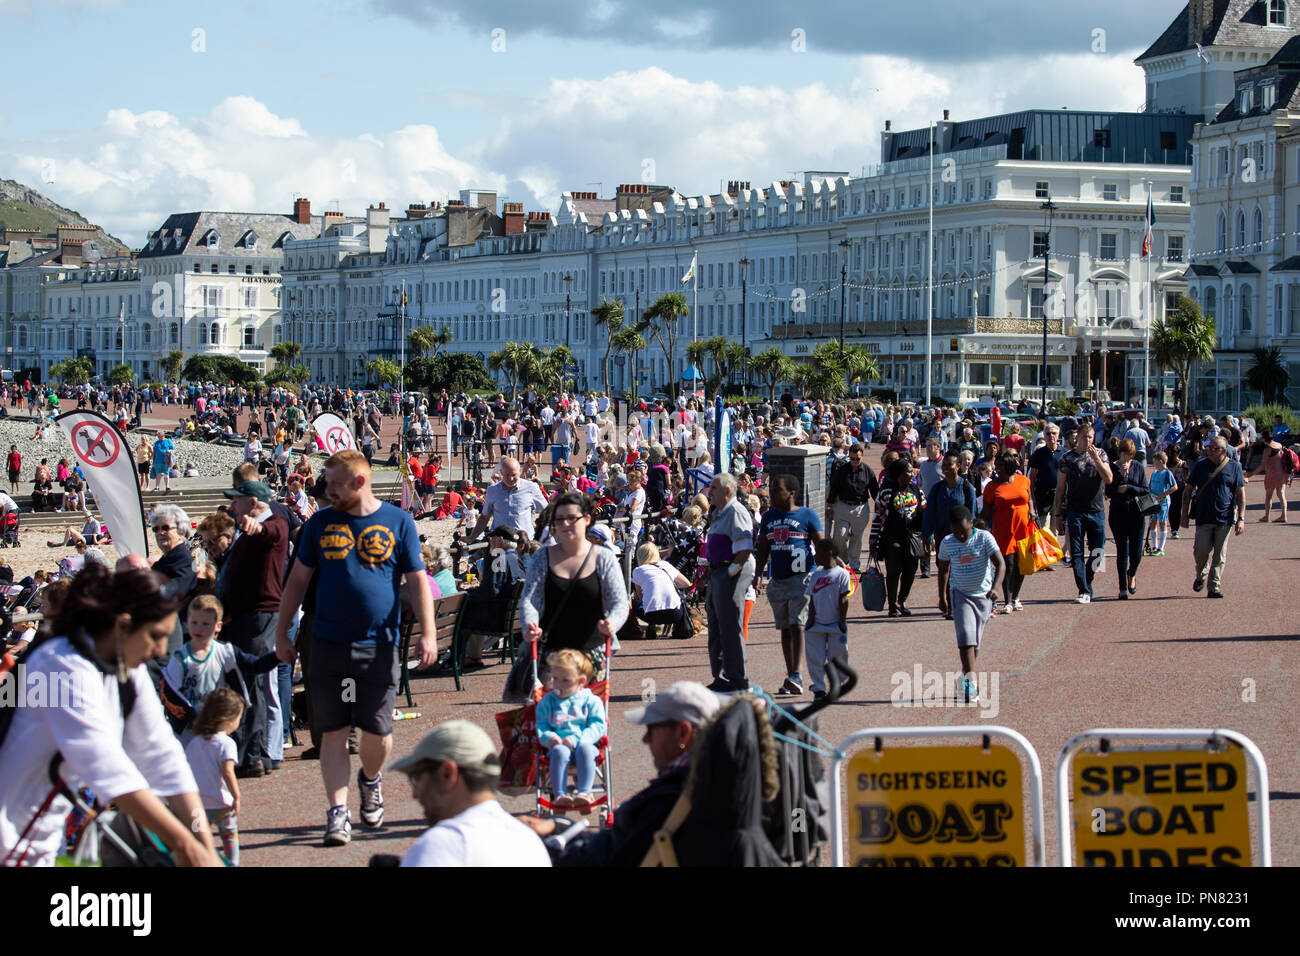 Hundreds of holiday makers enjoying the warm weather on the north shore promenade in Llandudno, North Wales Stock Photo